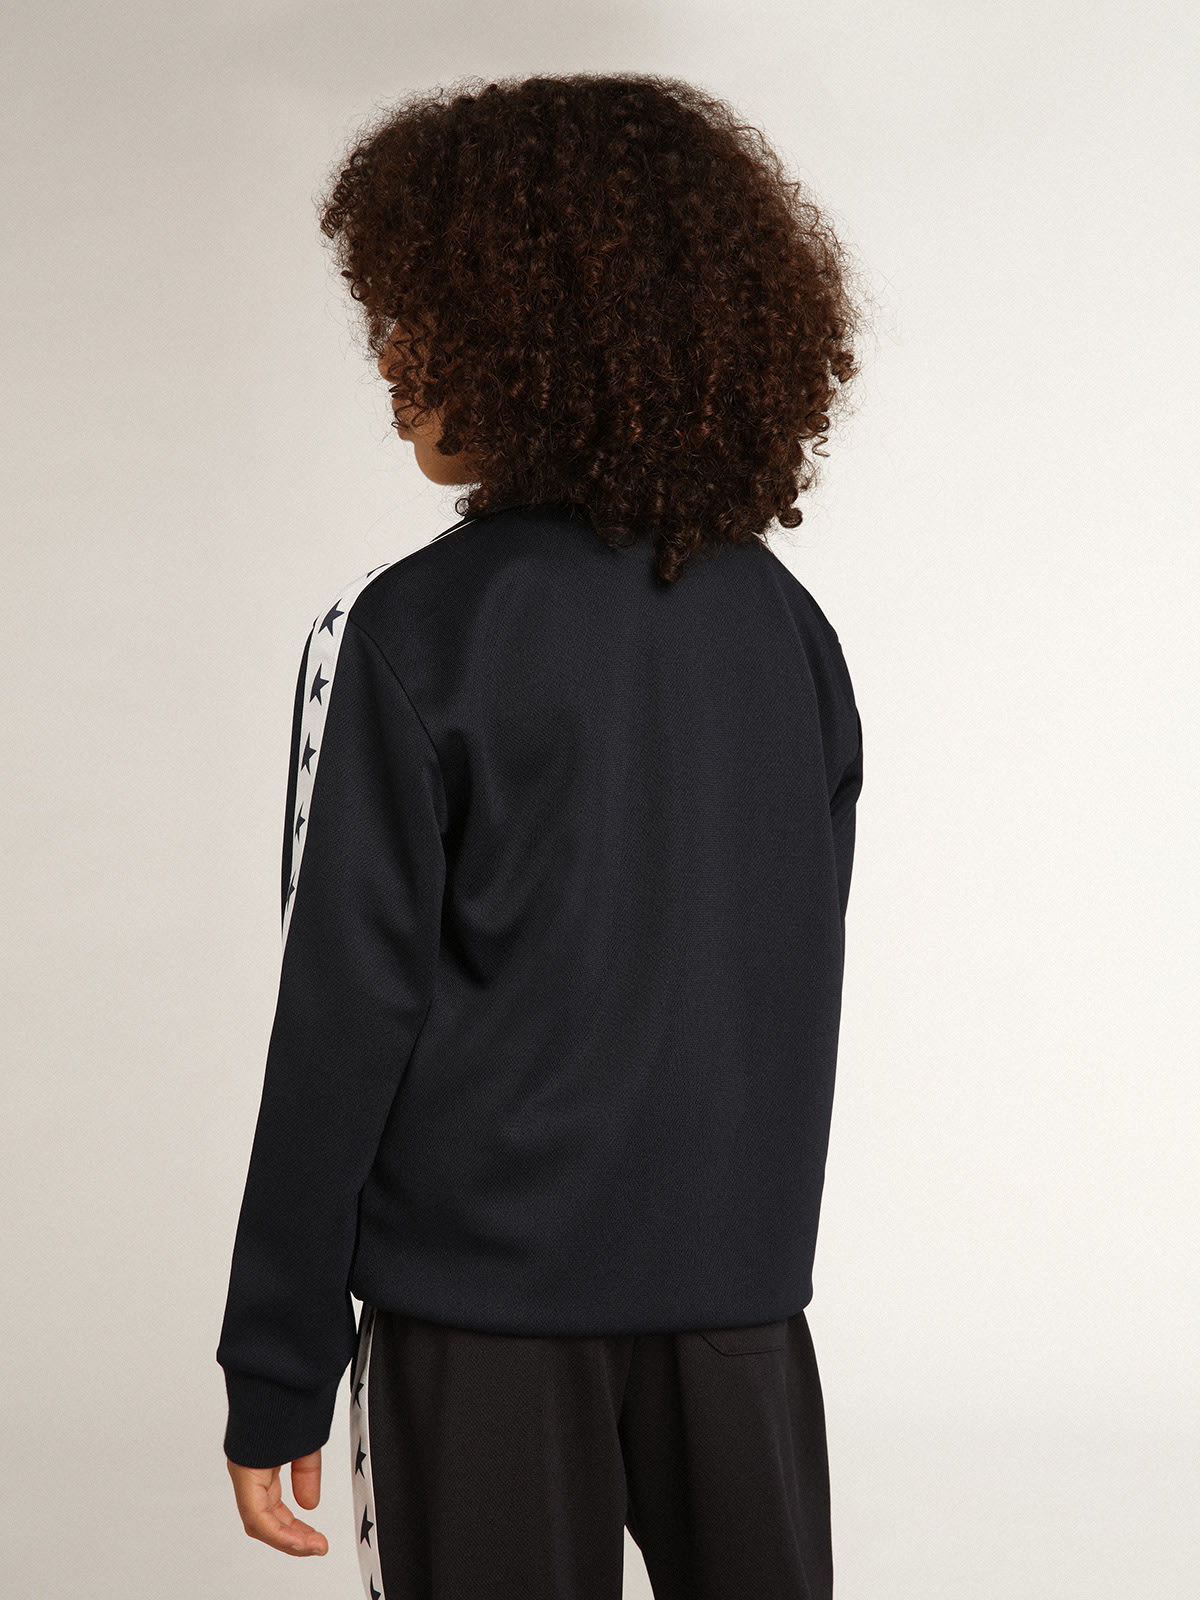 Golden Goose - Dark blue zipped sweatshirt with white strip and contrasting stars in 